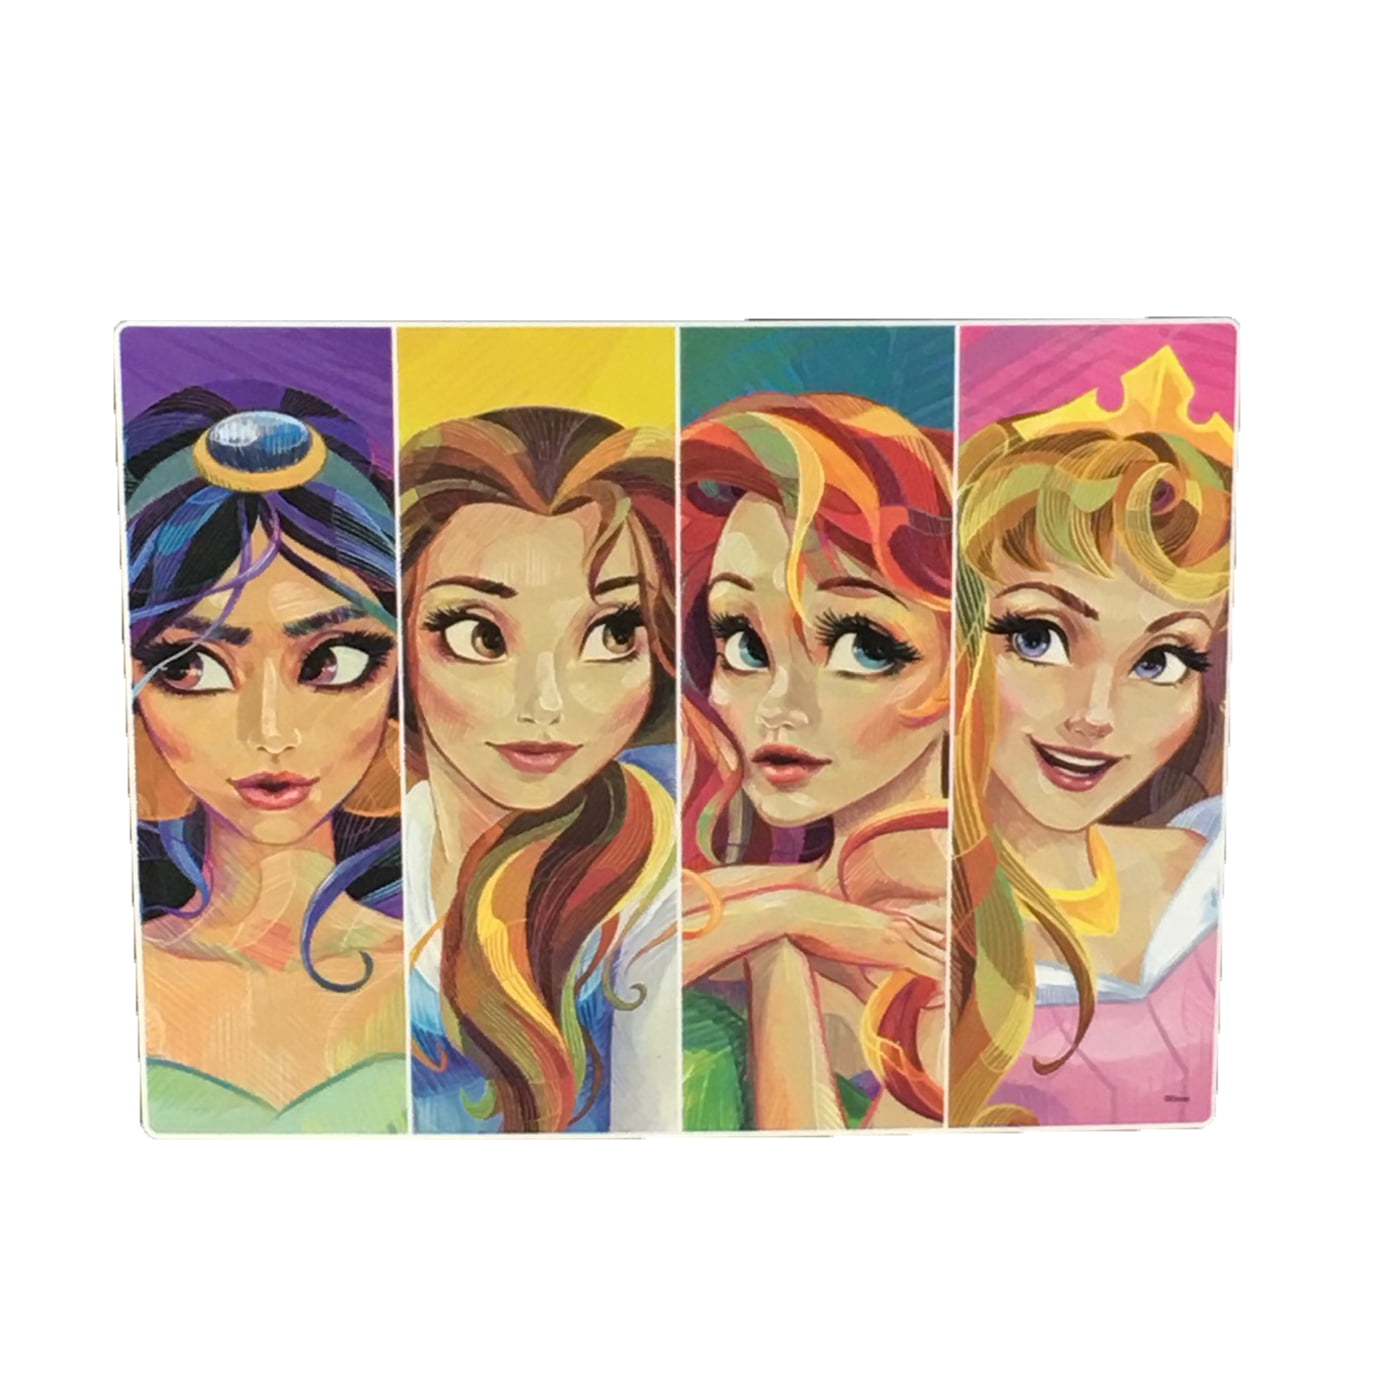 Disney Princesses 3 Pack Disney Puzzles 500 Piece Jigsaw Cardinal 14 in x 11 in 